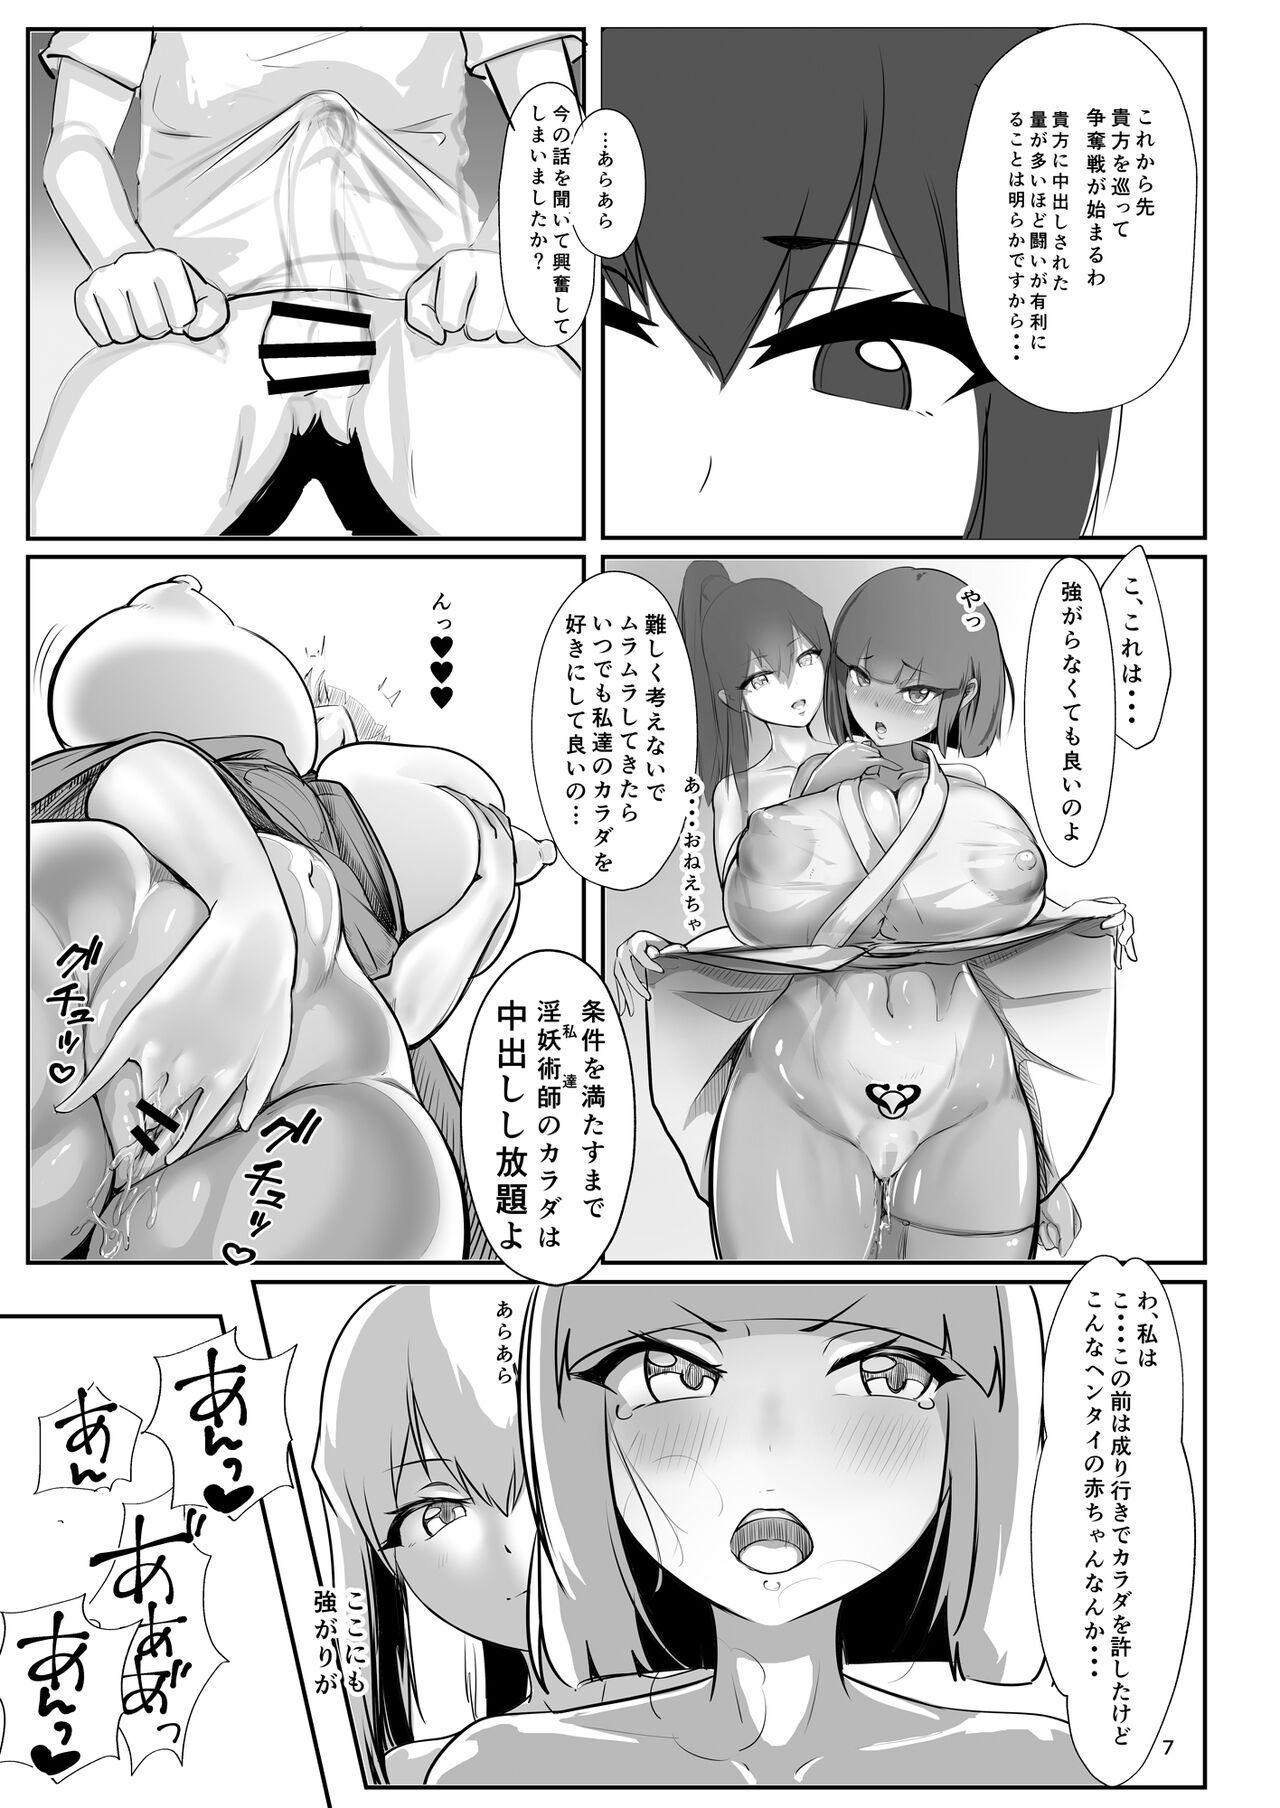 Thong 淫妖奇術競 弐 デカ乳変身ヒロイン中出しハーレム Soapy Massage - Page 6